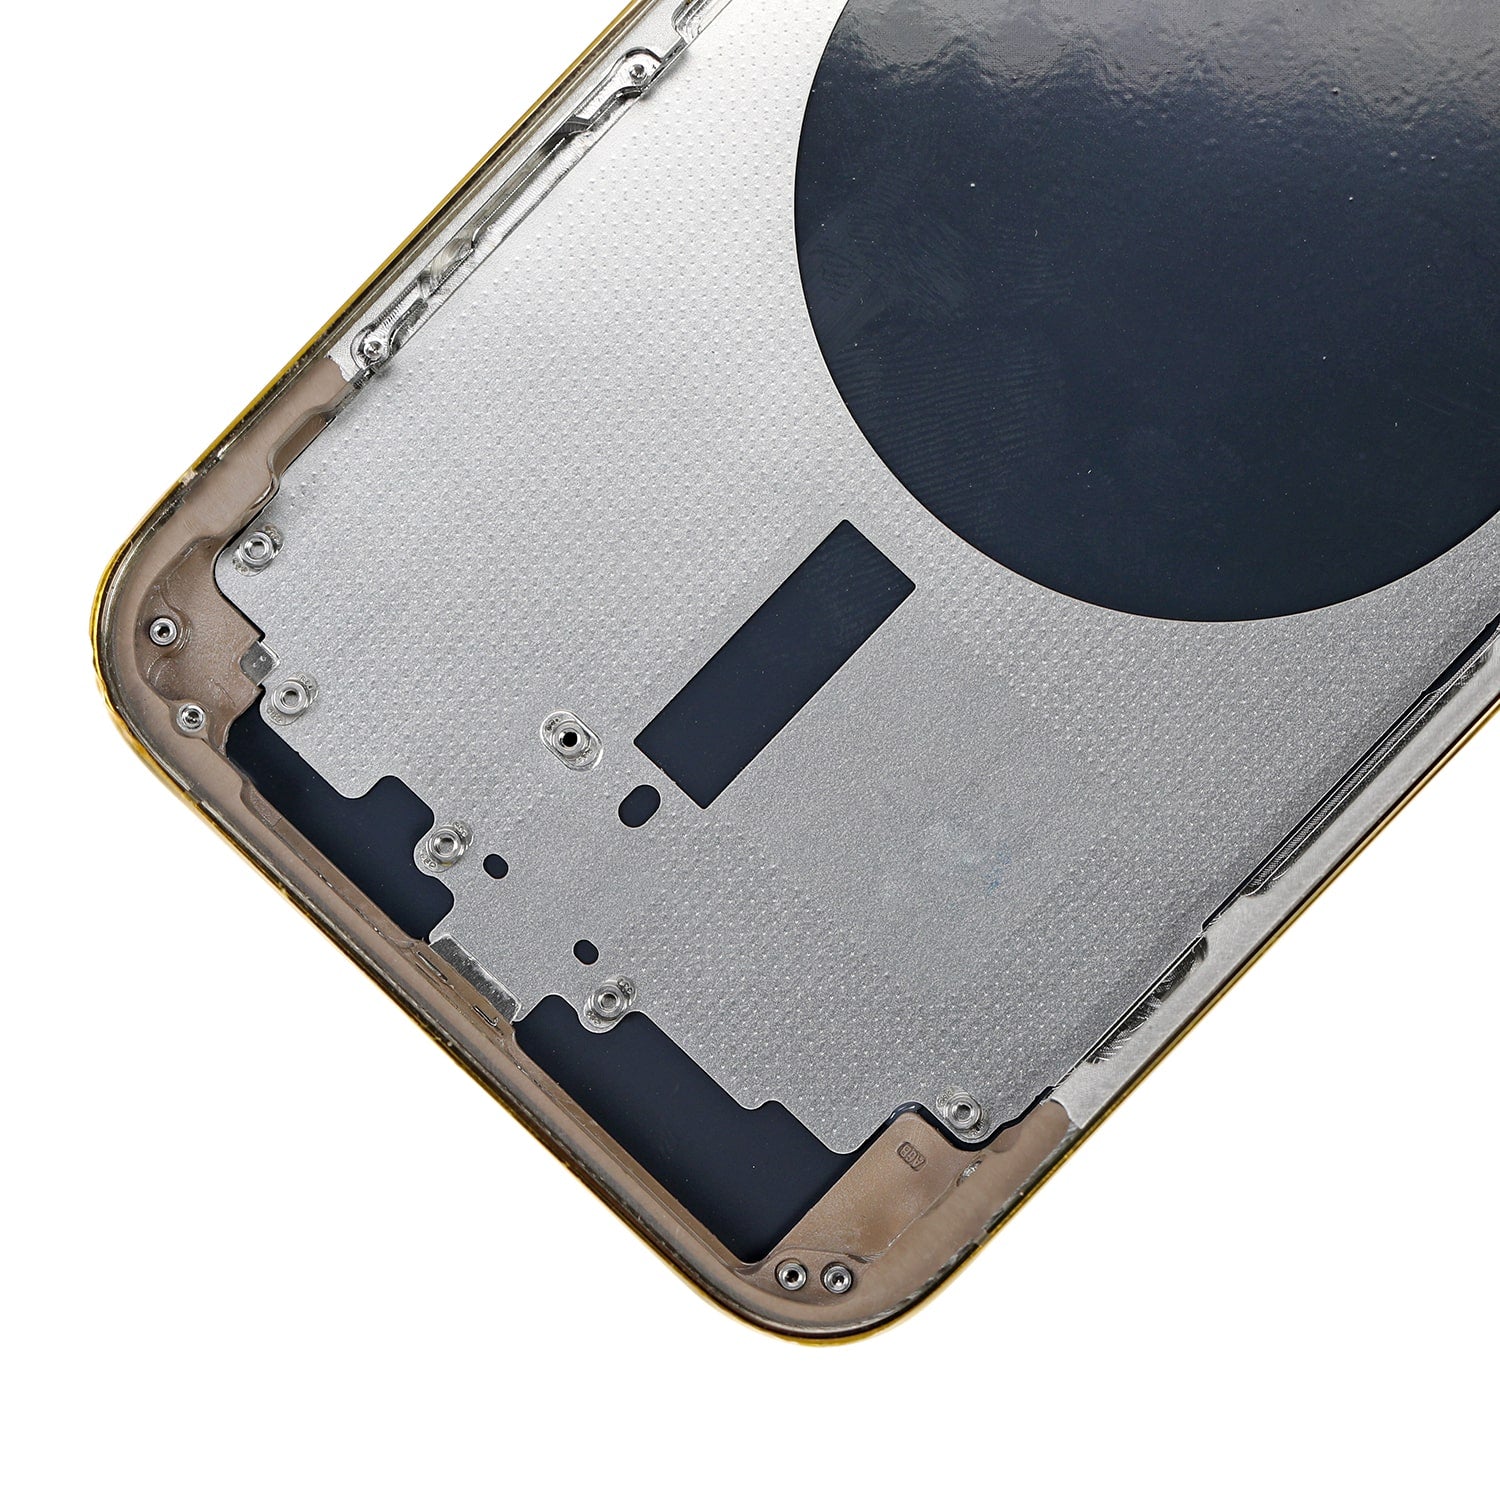 GOLD REAR HOUSING WITH FRAME FOR IPHONE 13 PRO